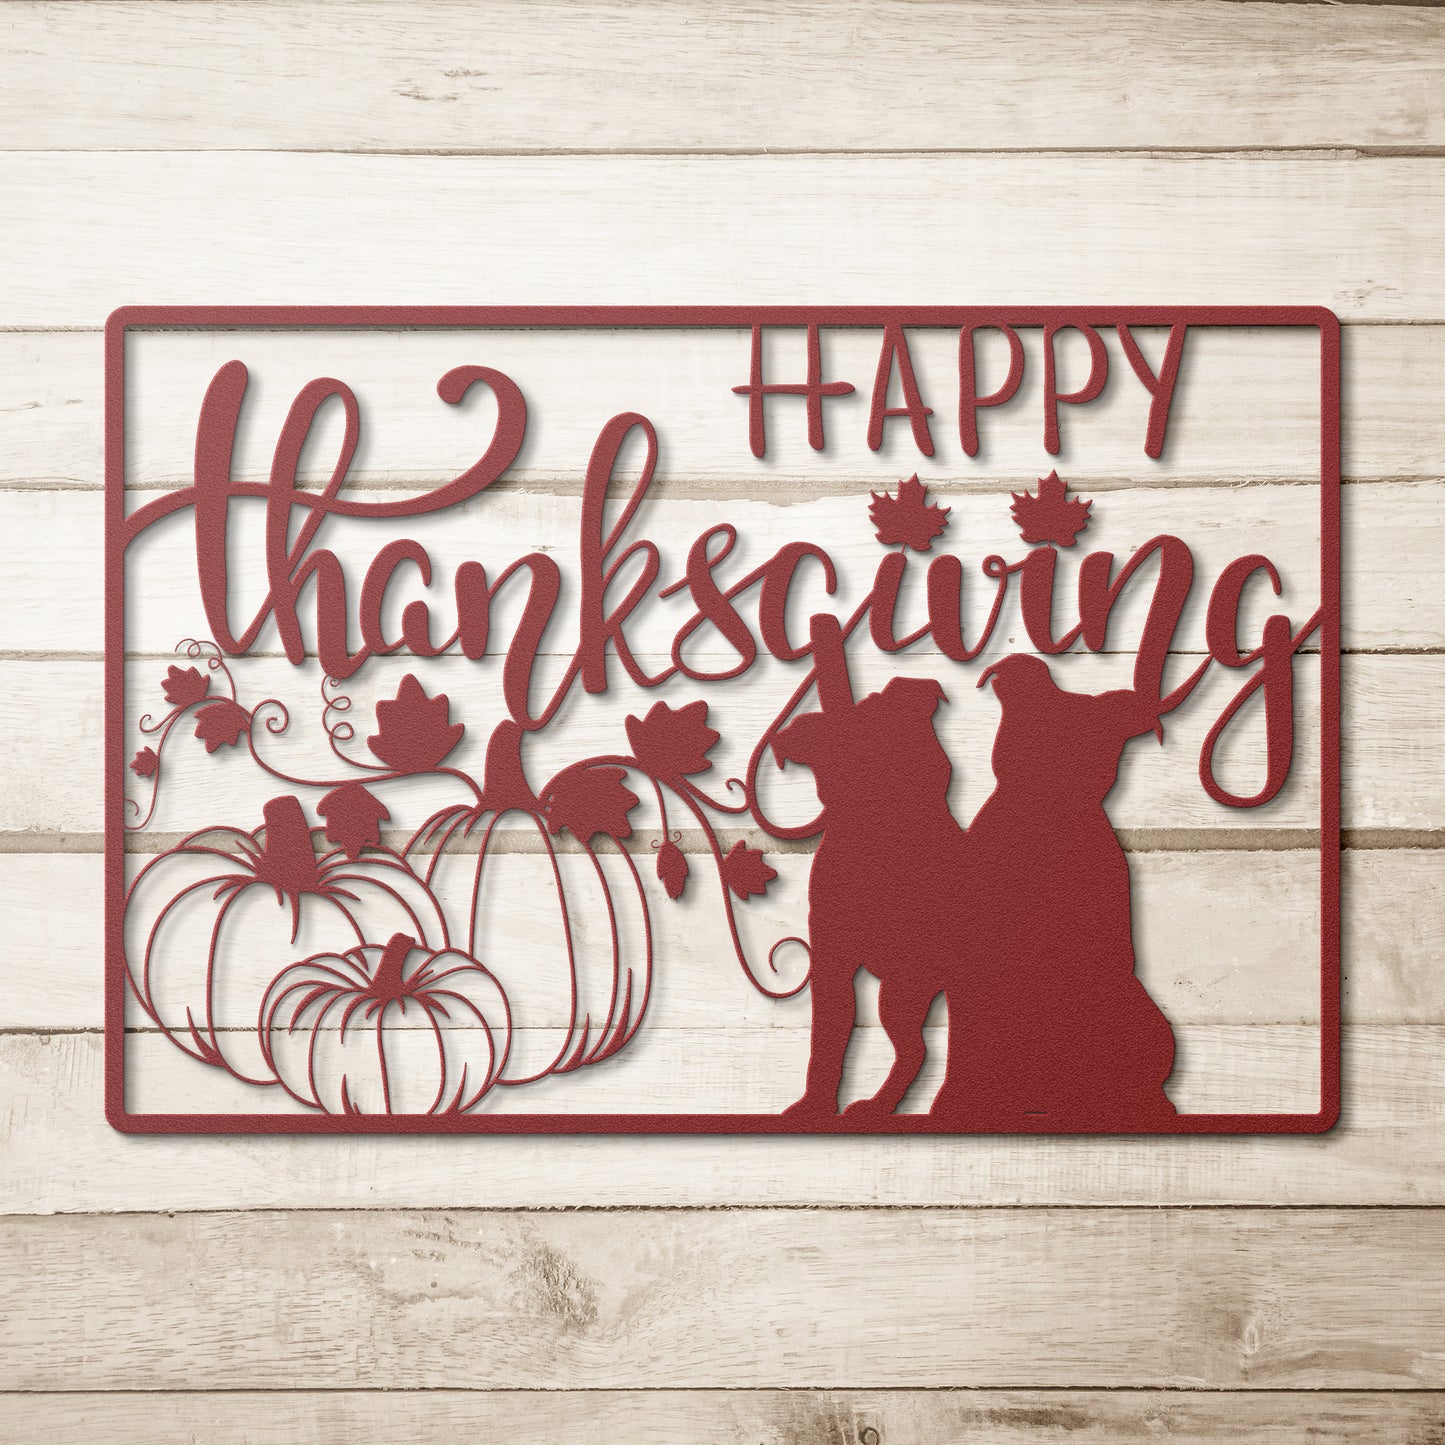 Happy Thanksgiving Natural Eared Dogos Metal Sign